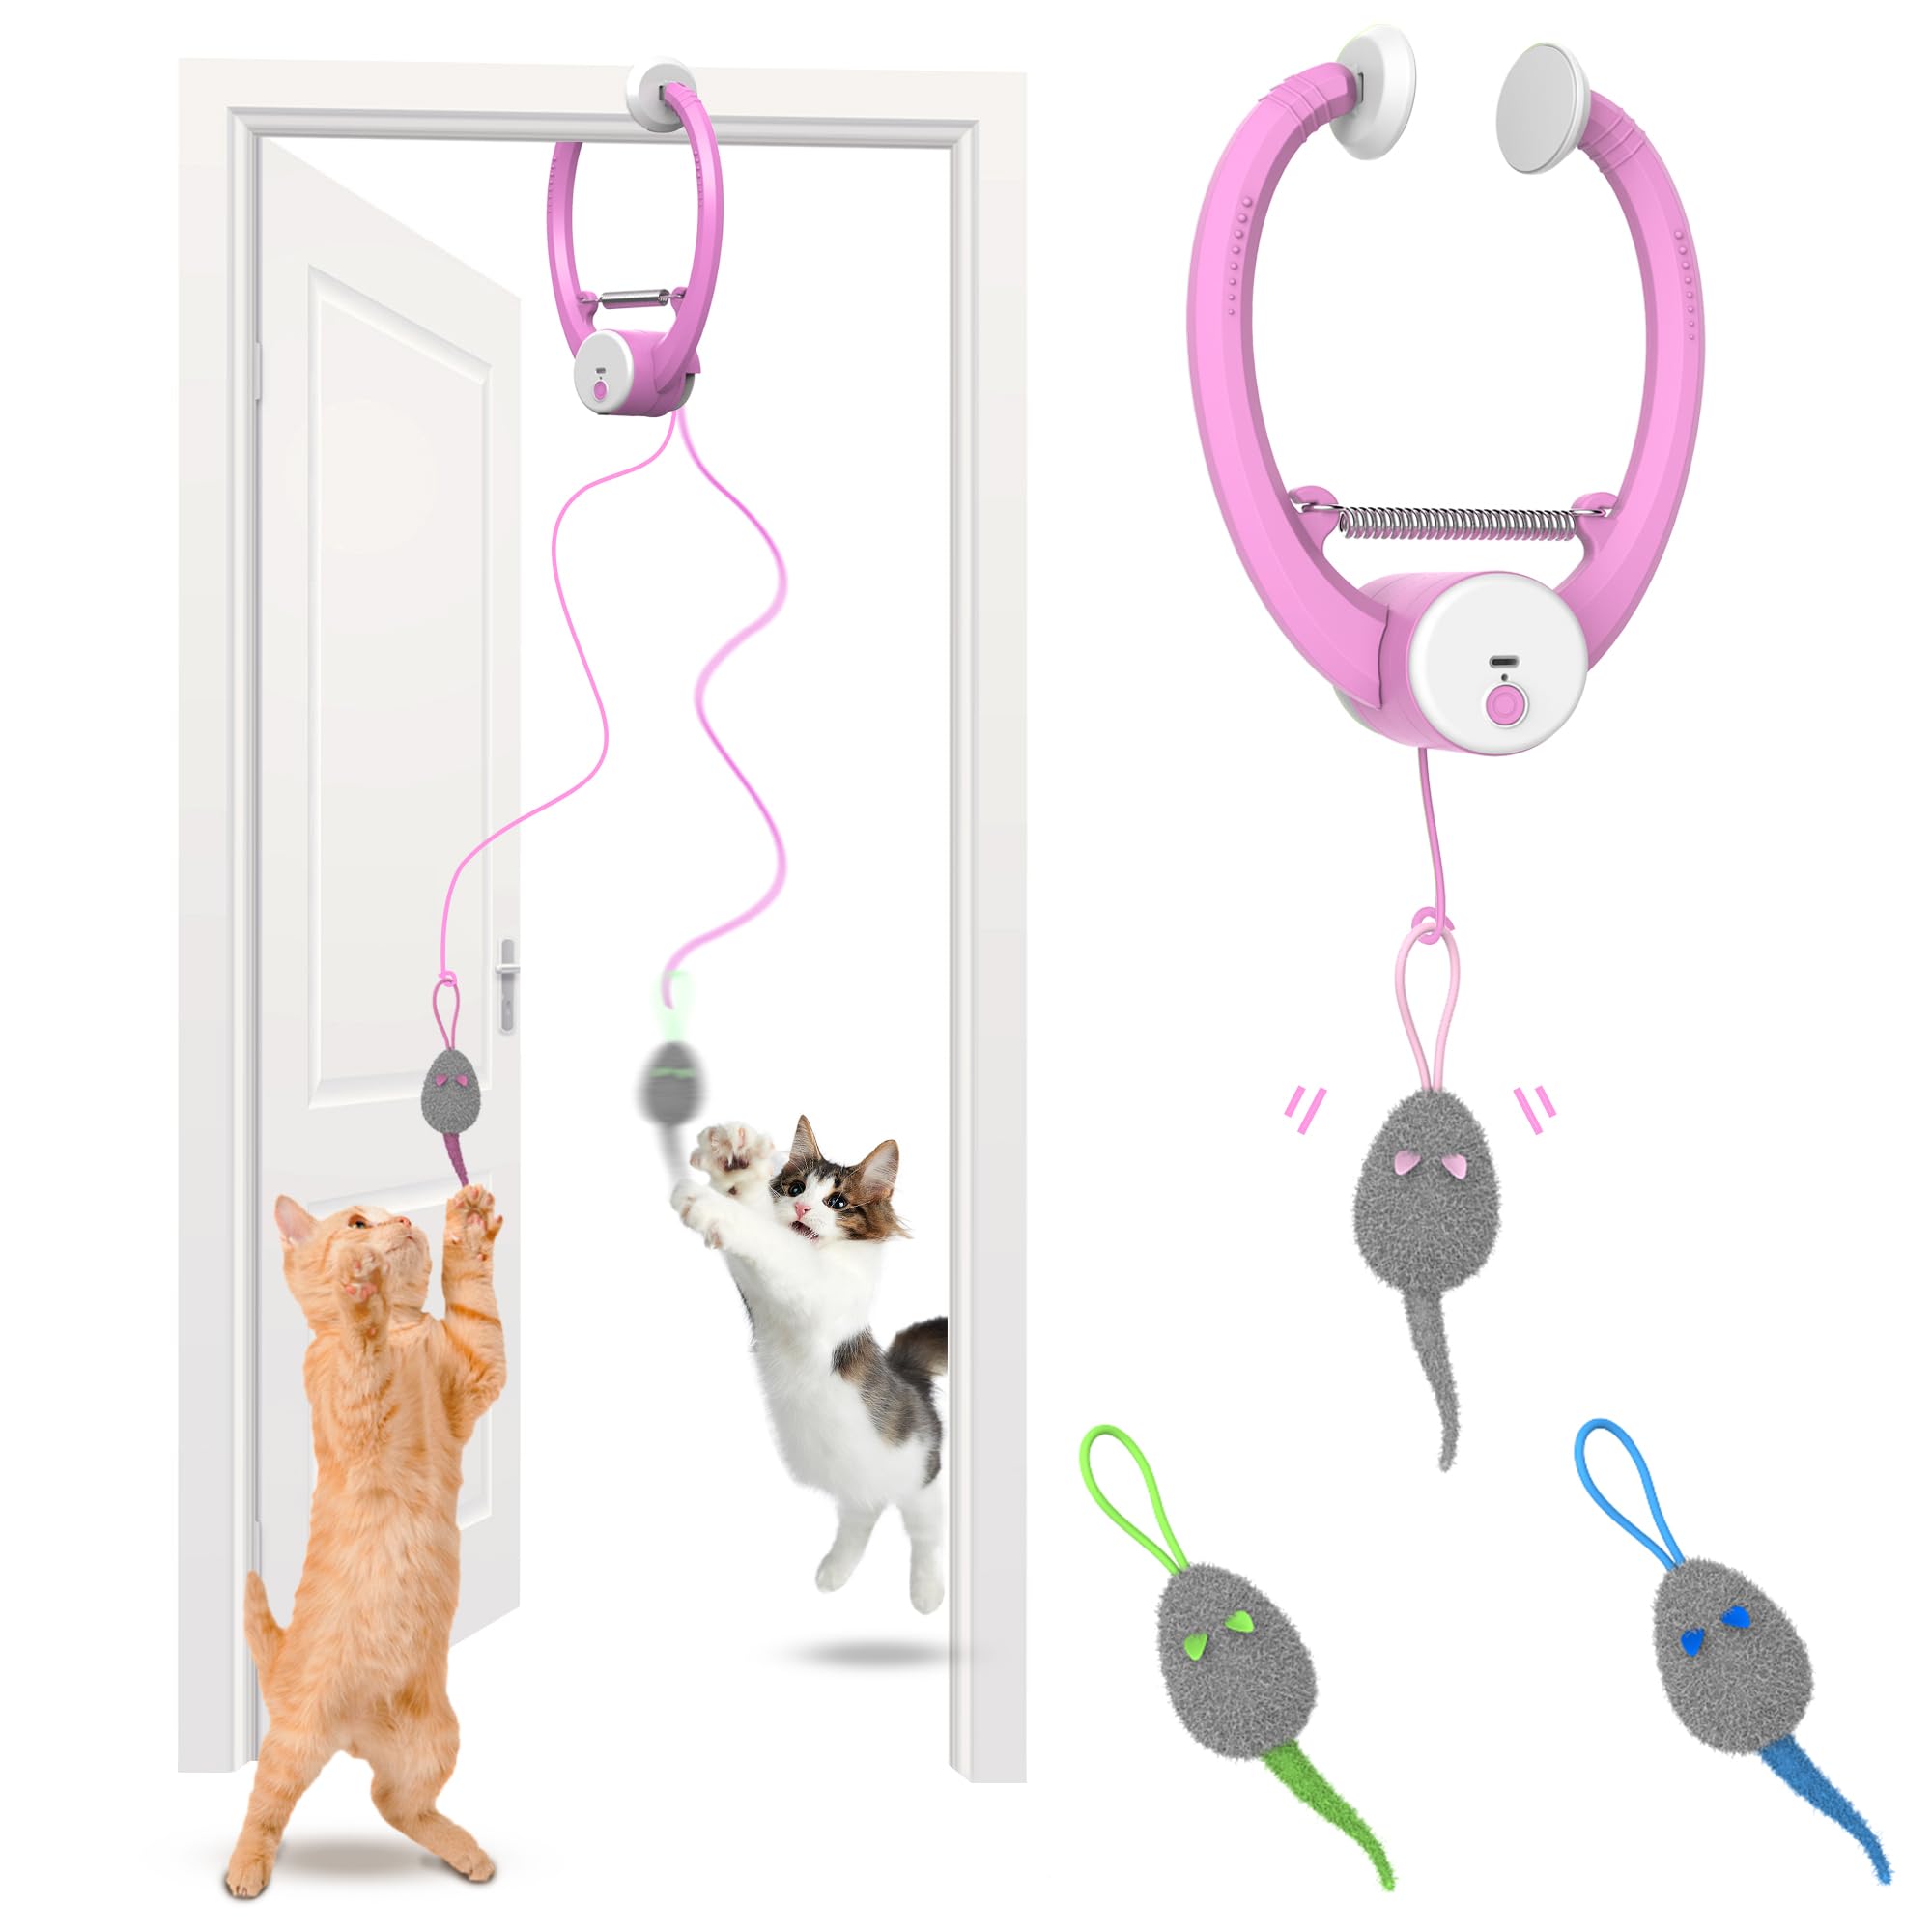 Bolpetizo Cat Toys, Hanging Automatic Interactive Cat Toy, Colorful Bouncing Mice, Extra Long Elastic Rope, Motion Activated Rechargeable 